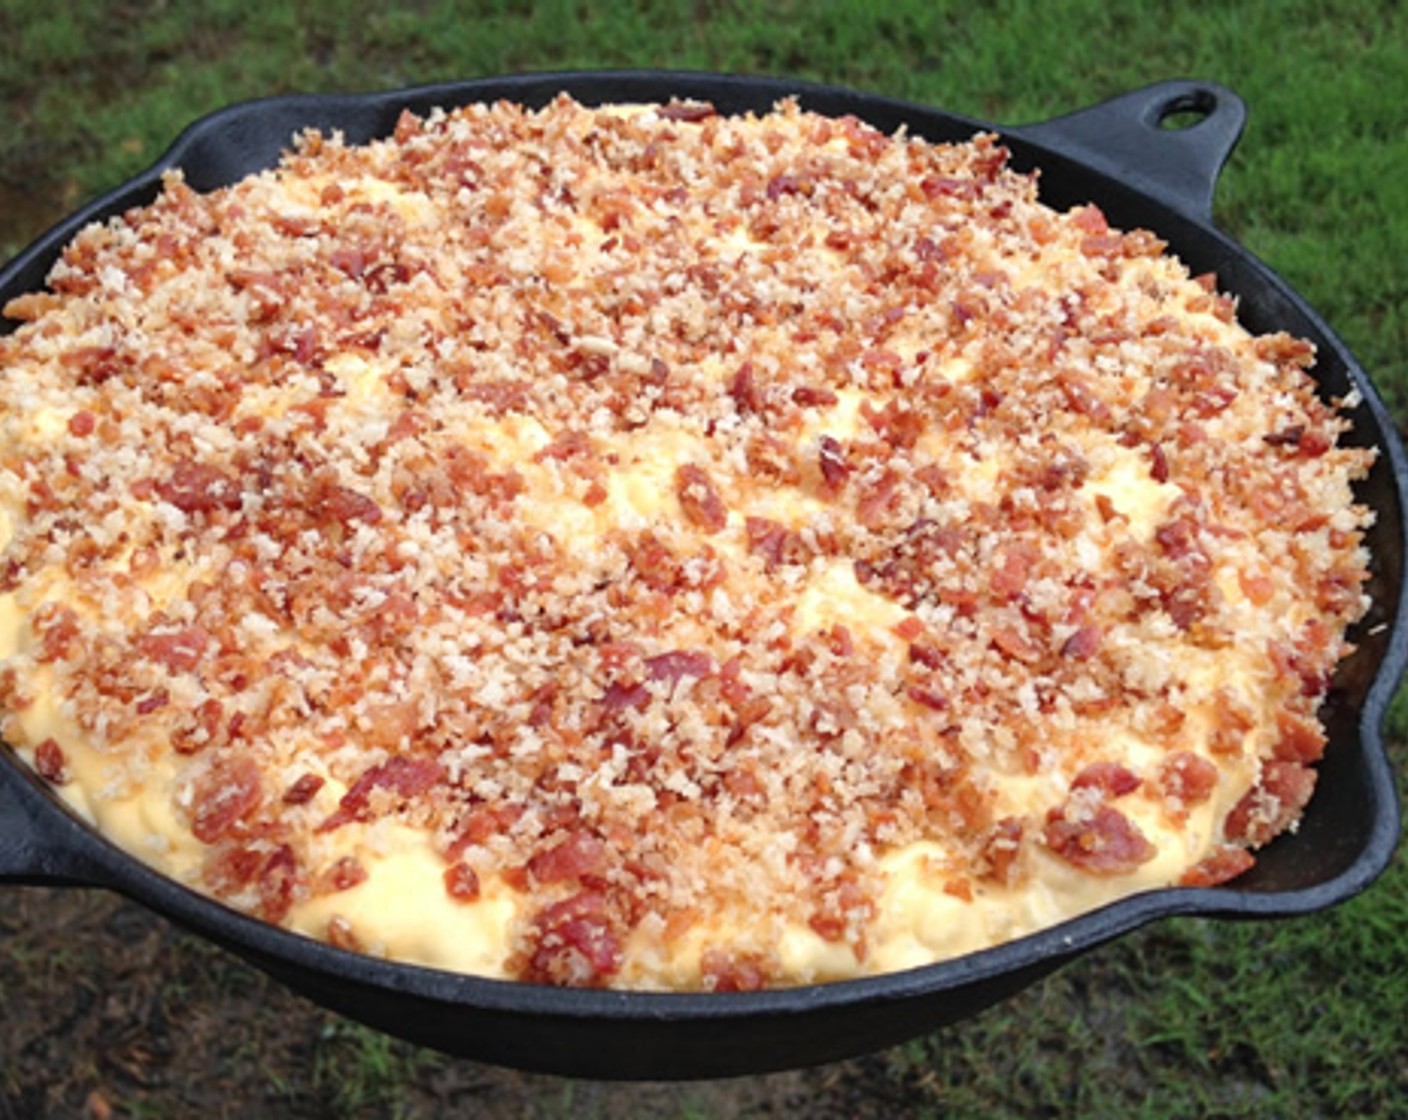 step 9 Mix Panko Breadcrumbs (1/2 cup) with chopped bacon. Top mac and cheese with panko/bacon mixture. To smoke the mac and cheese, place the skillet in your 350 degrees F (180 degrees C) smoker for 1 hour, or until mac and cheese becomes hot and bubbly.